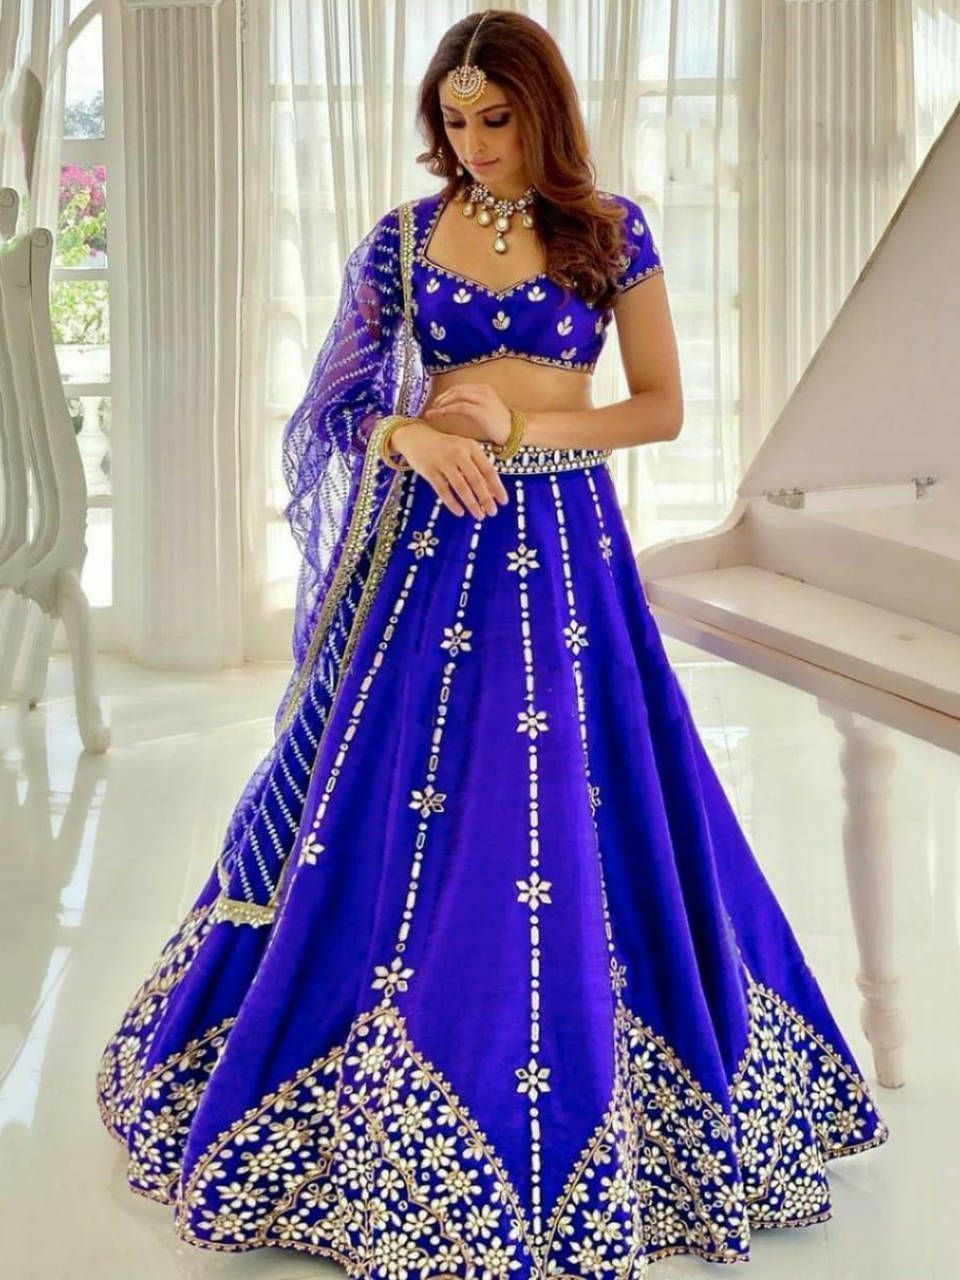 Indian Bride In Blue Lehenga Dress Sitting On A Decorated Seat With Flowers  At A Wedding Stage With Beautiful Simple Decoration Stock Photo - Download  Image Now - iStock